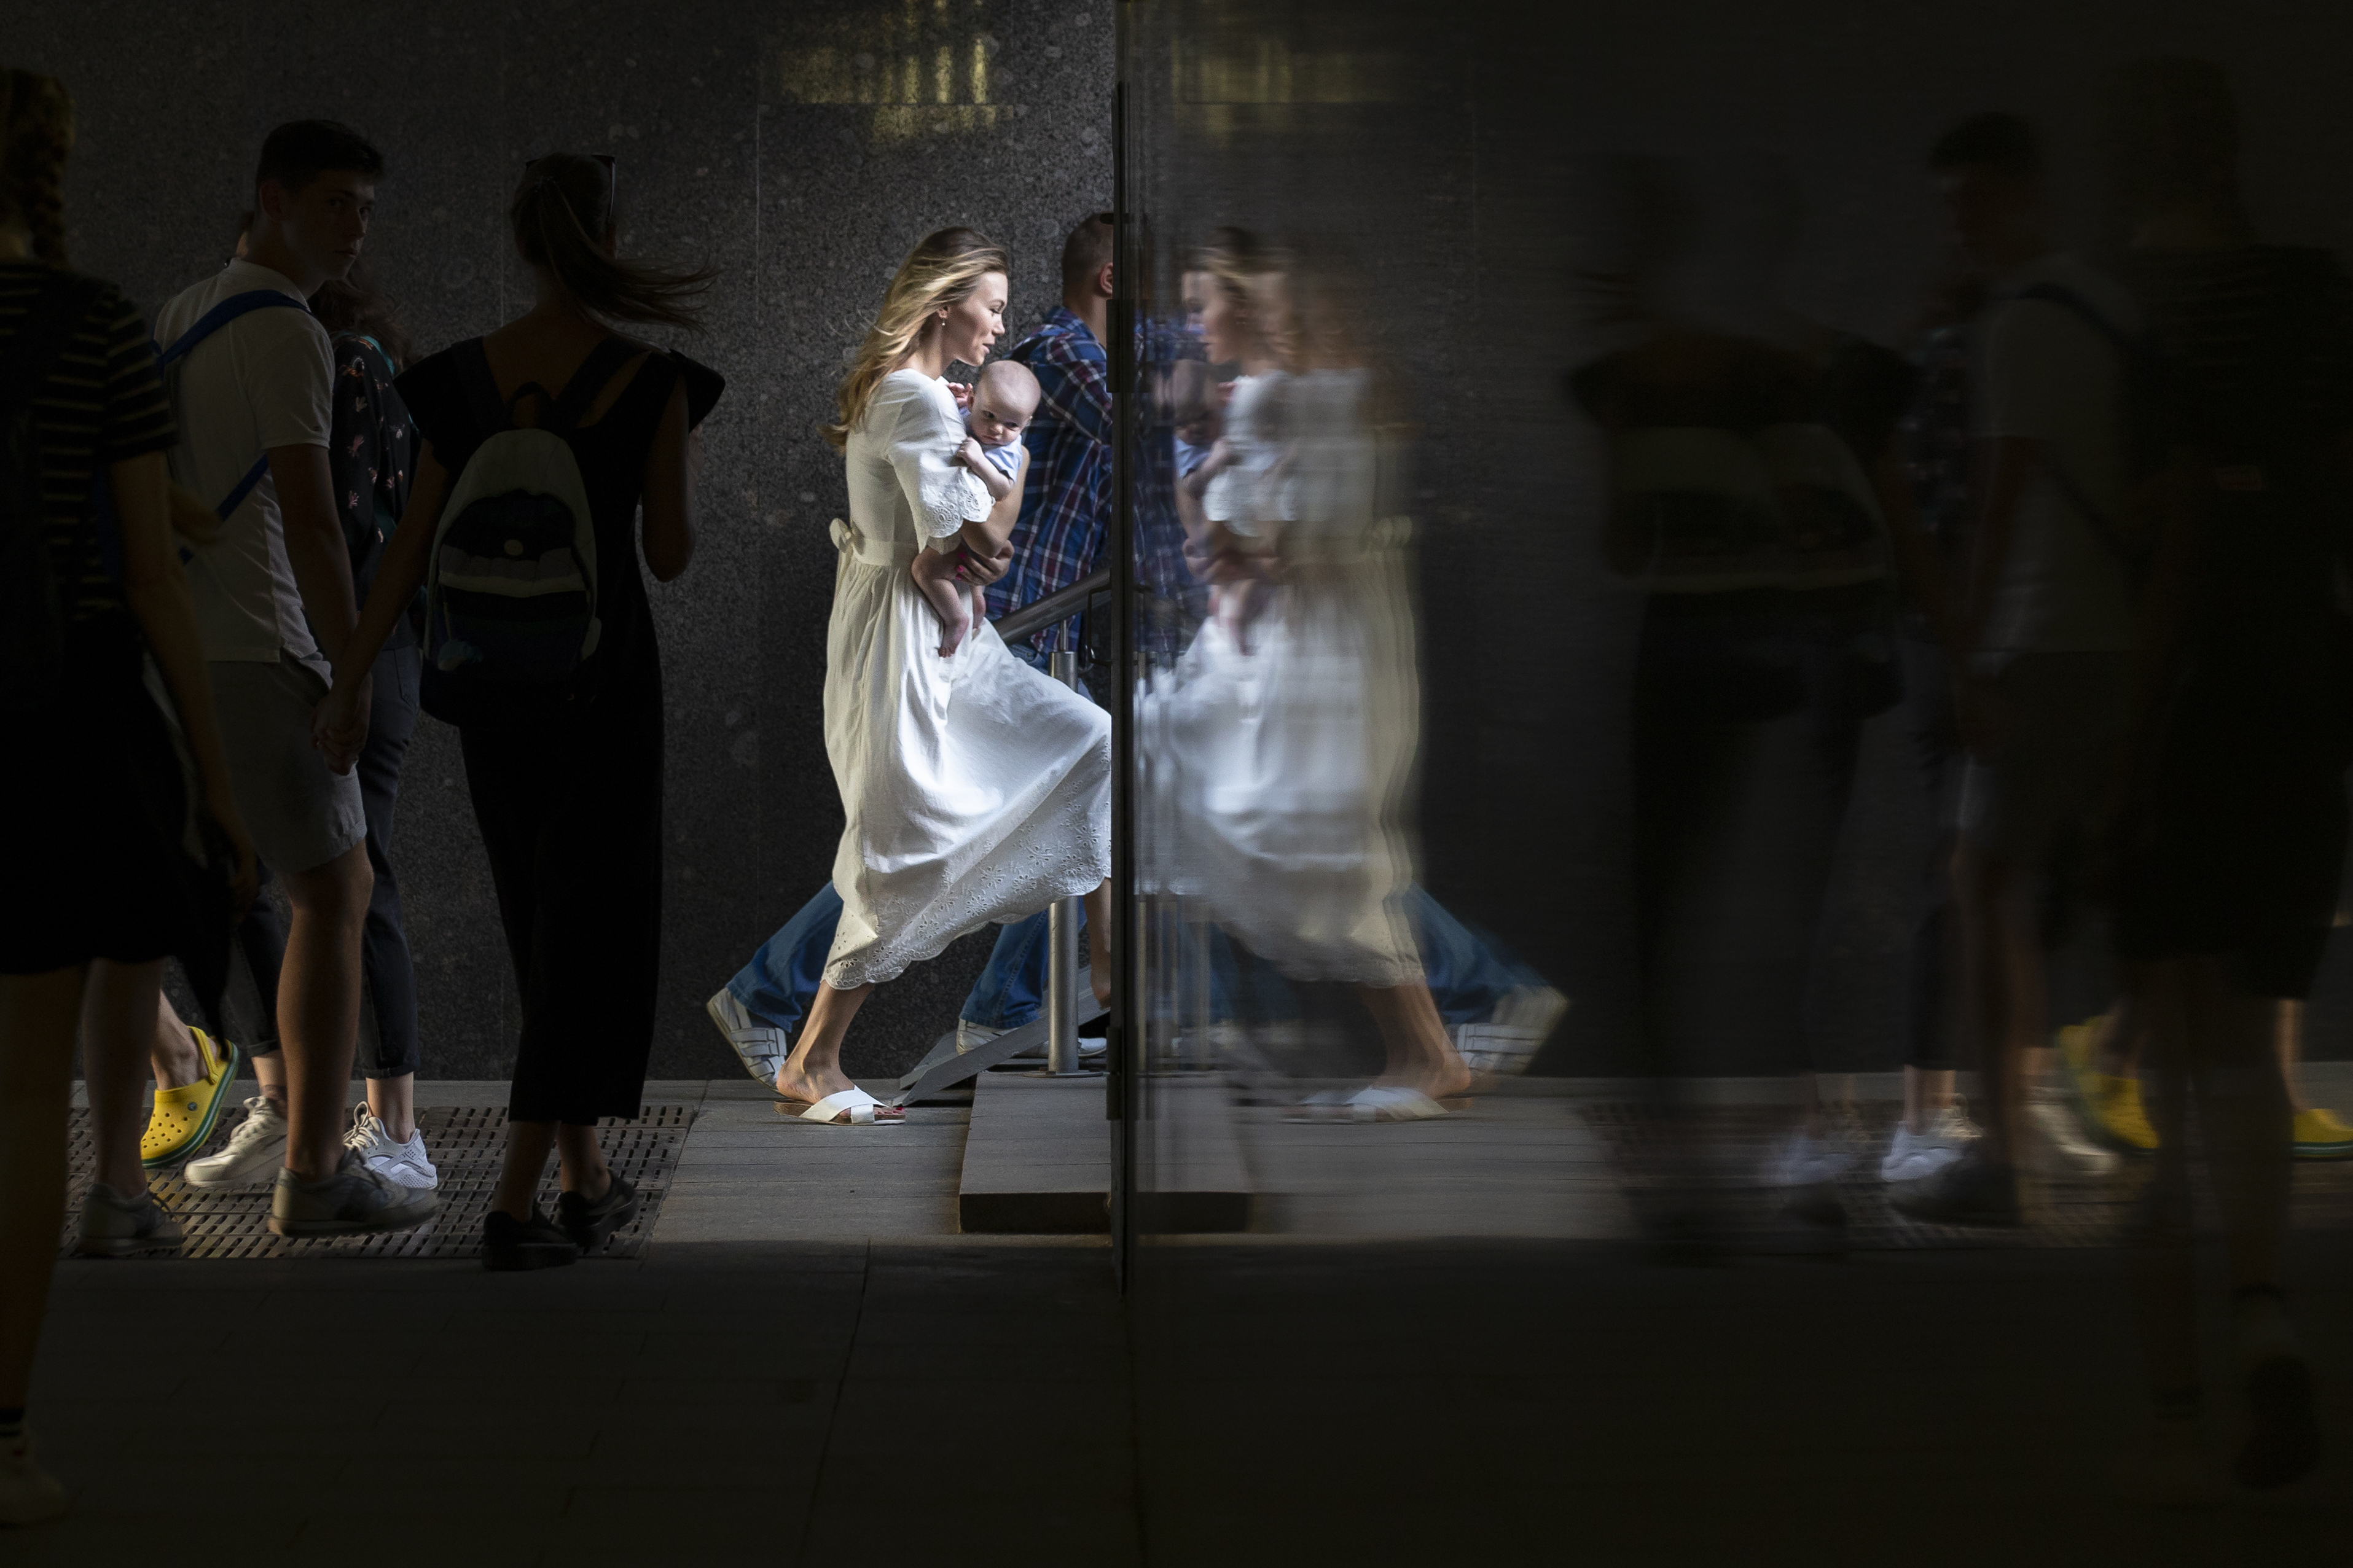 A woman carrying her child is reflected in a wall as she steps up in a subway in Moscow, Russia, Wednesday, Aug. 29, 2018. (AP Photo/Alexander Zemlianichenko)